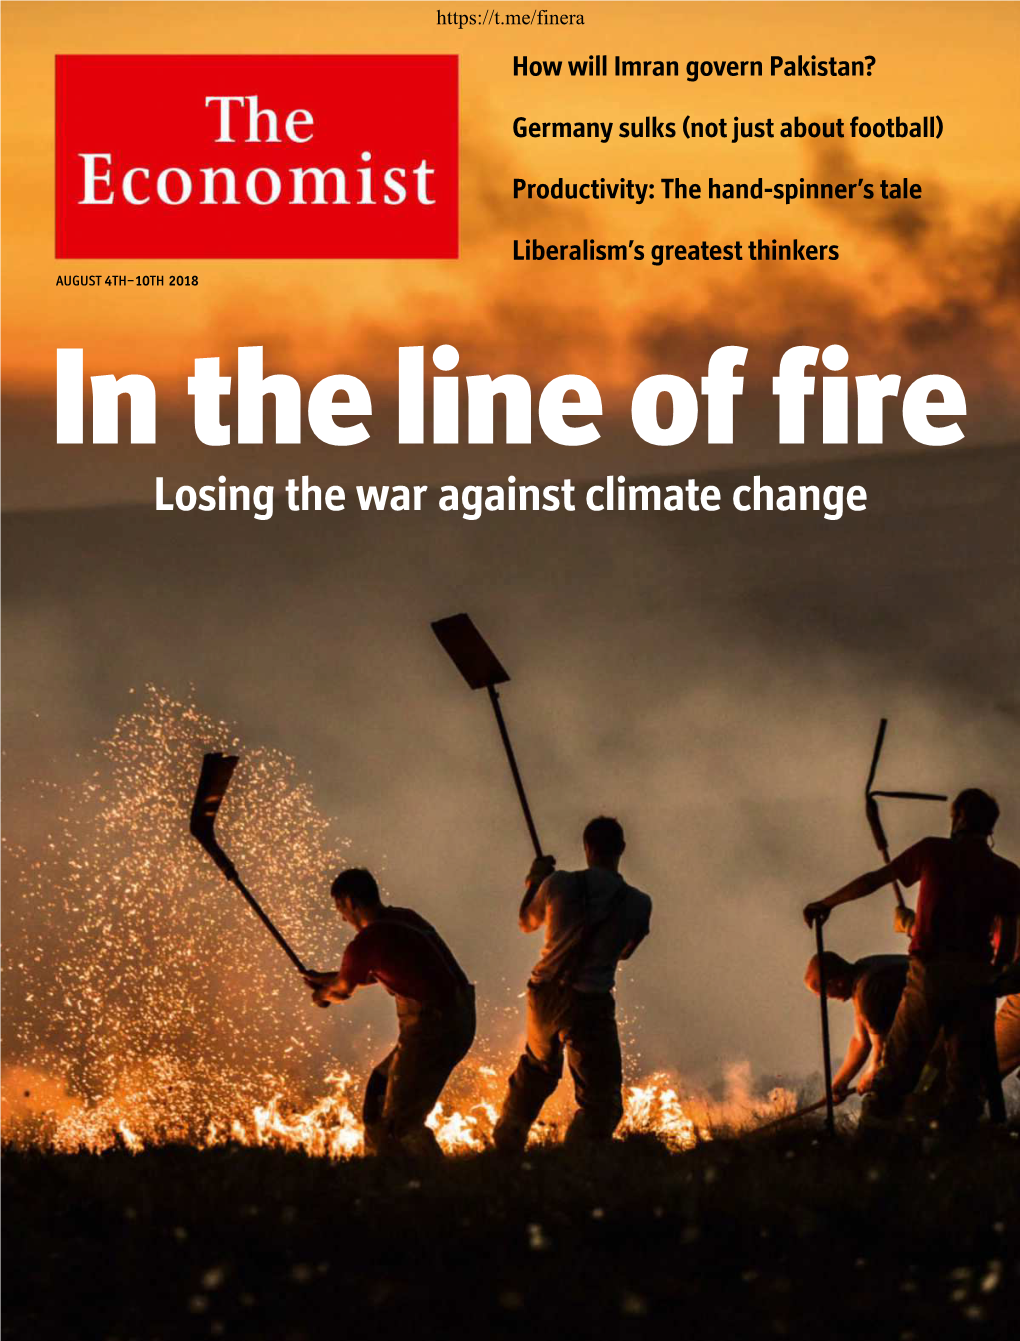 Losing the War Against Climate Change Financial Era Advisory Group Contents the Economist August 4Th 2018 3